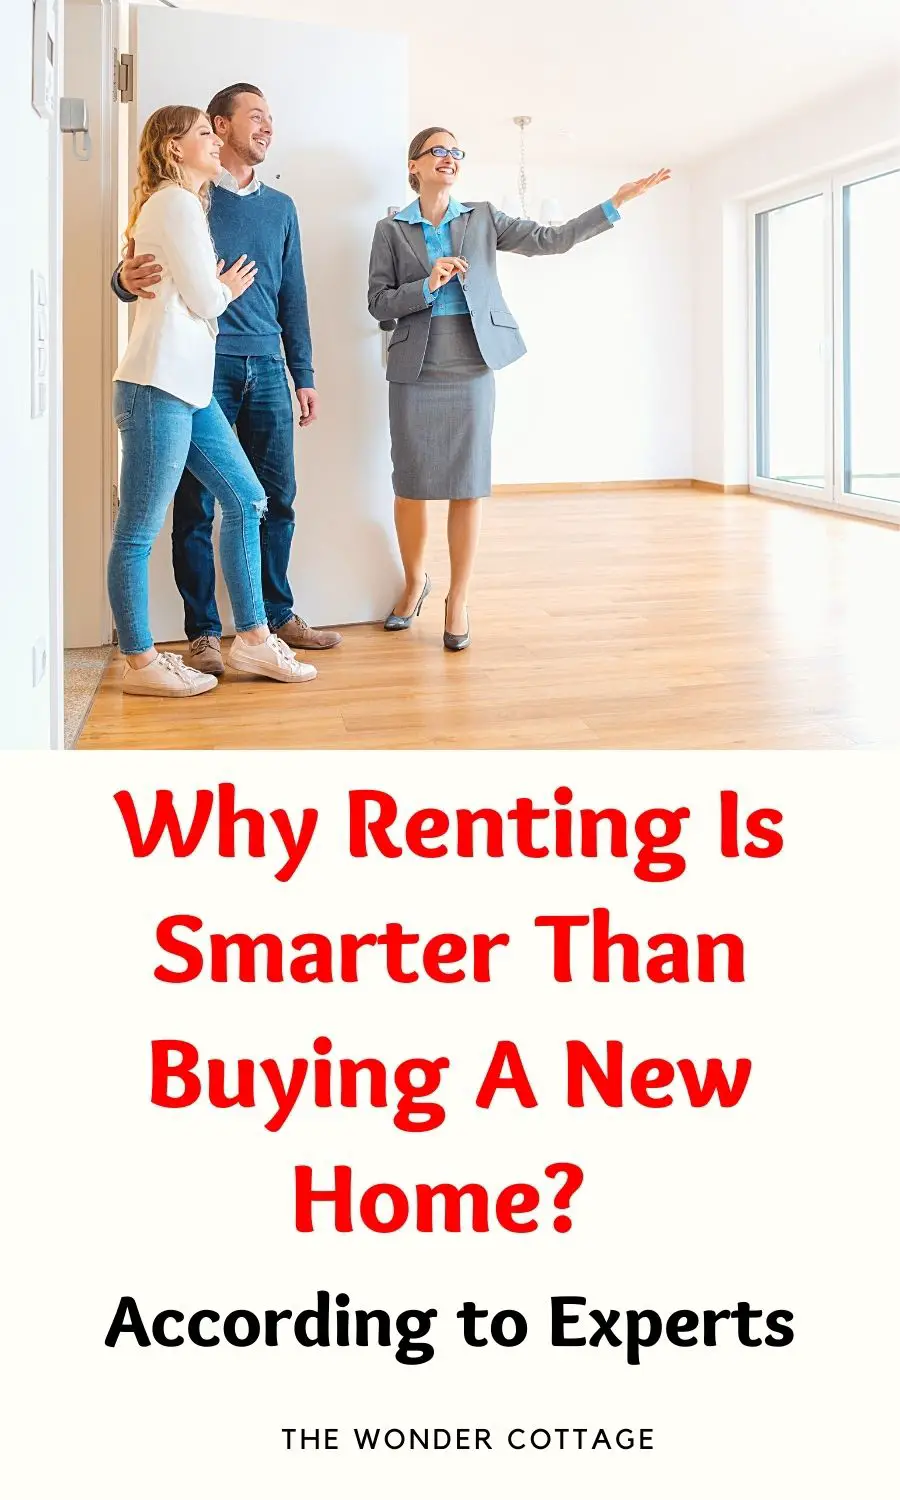 Why Renting Is Smarter Than Buying a New Home? According to Experts